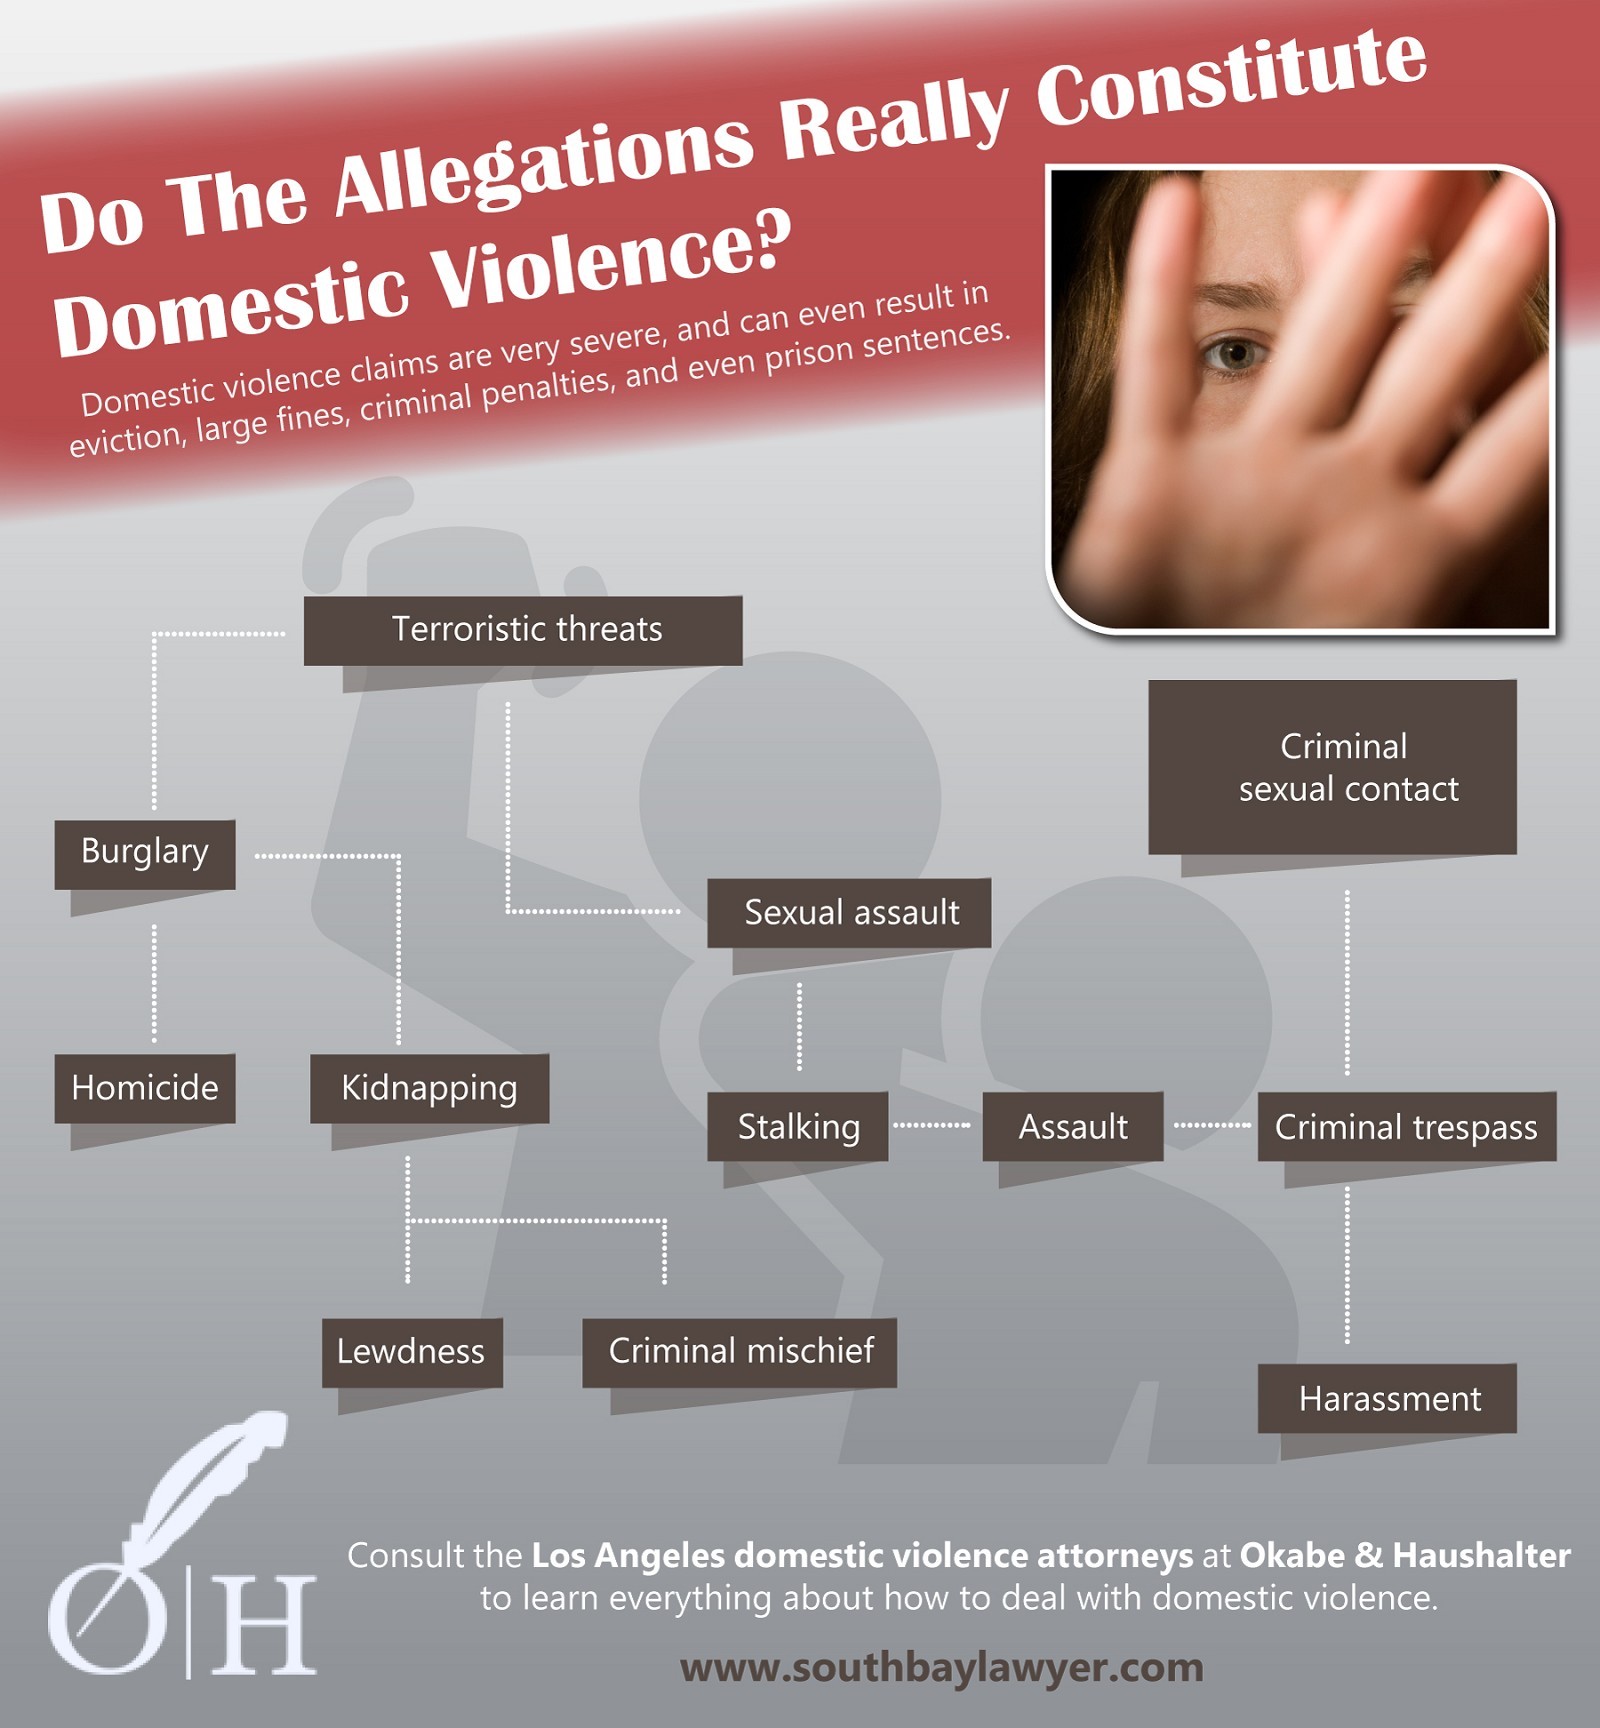 Do The Allegations Really Constitute Domestic Violence?